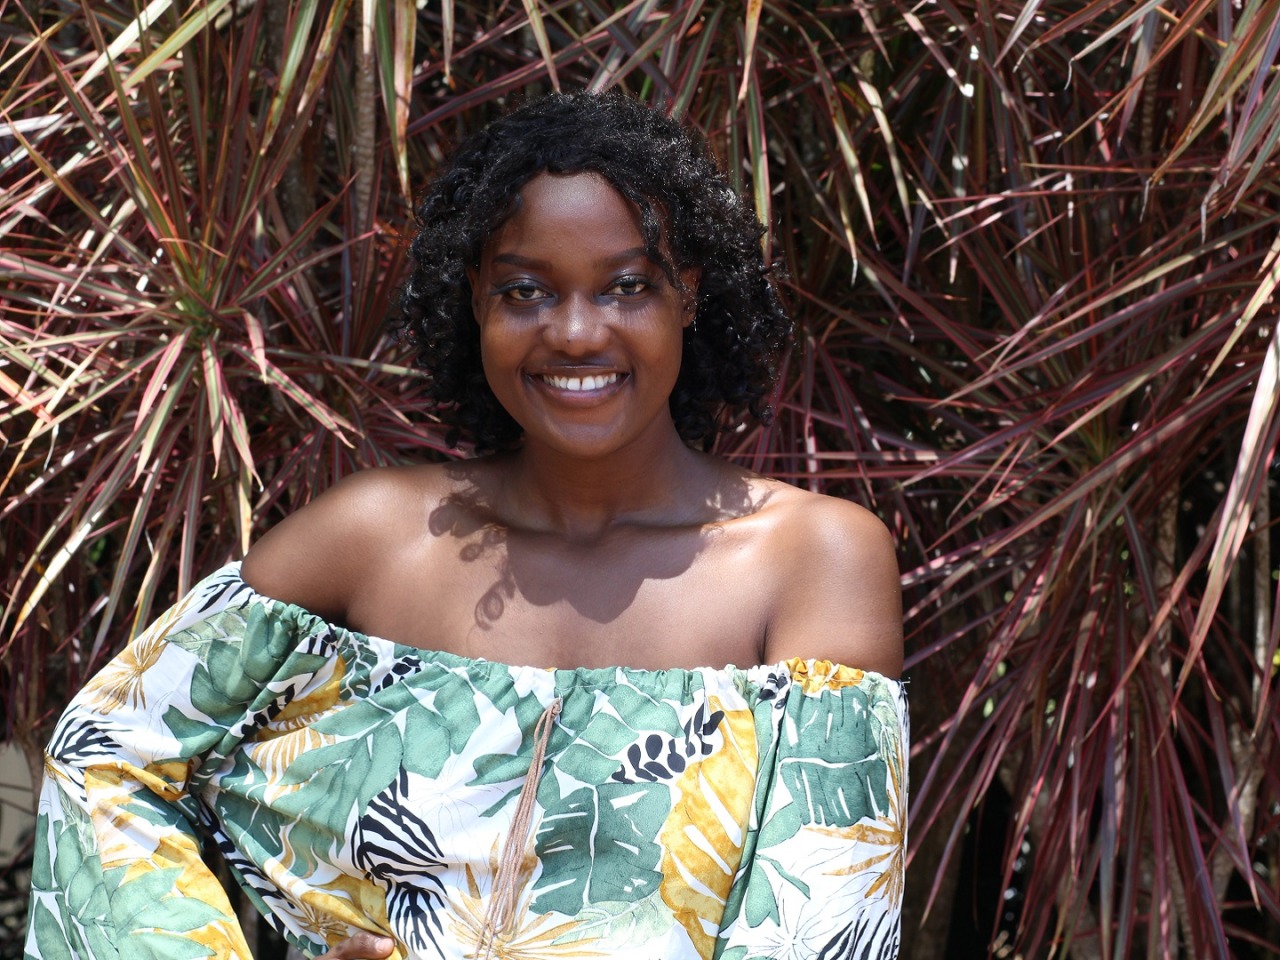 “Coming from a rather conservative community back in Zimbabwe, studying at Curtin Malaysia has given me a different perspective on life. It has got me thinking more about female empowerment, educating African society and how cultural norms can be...